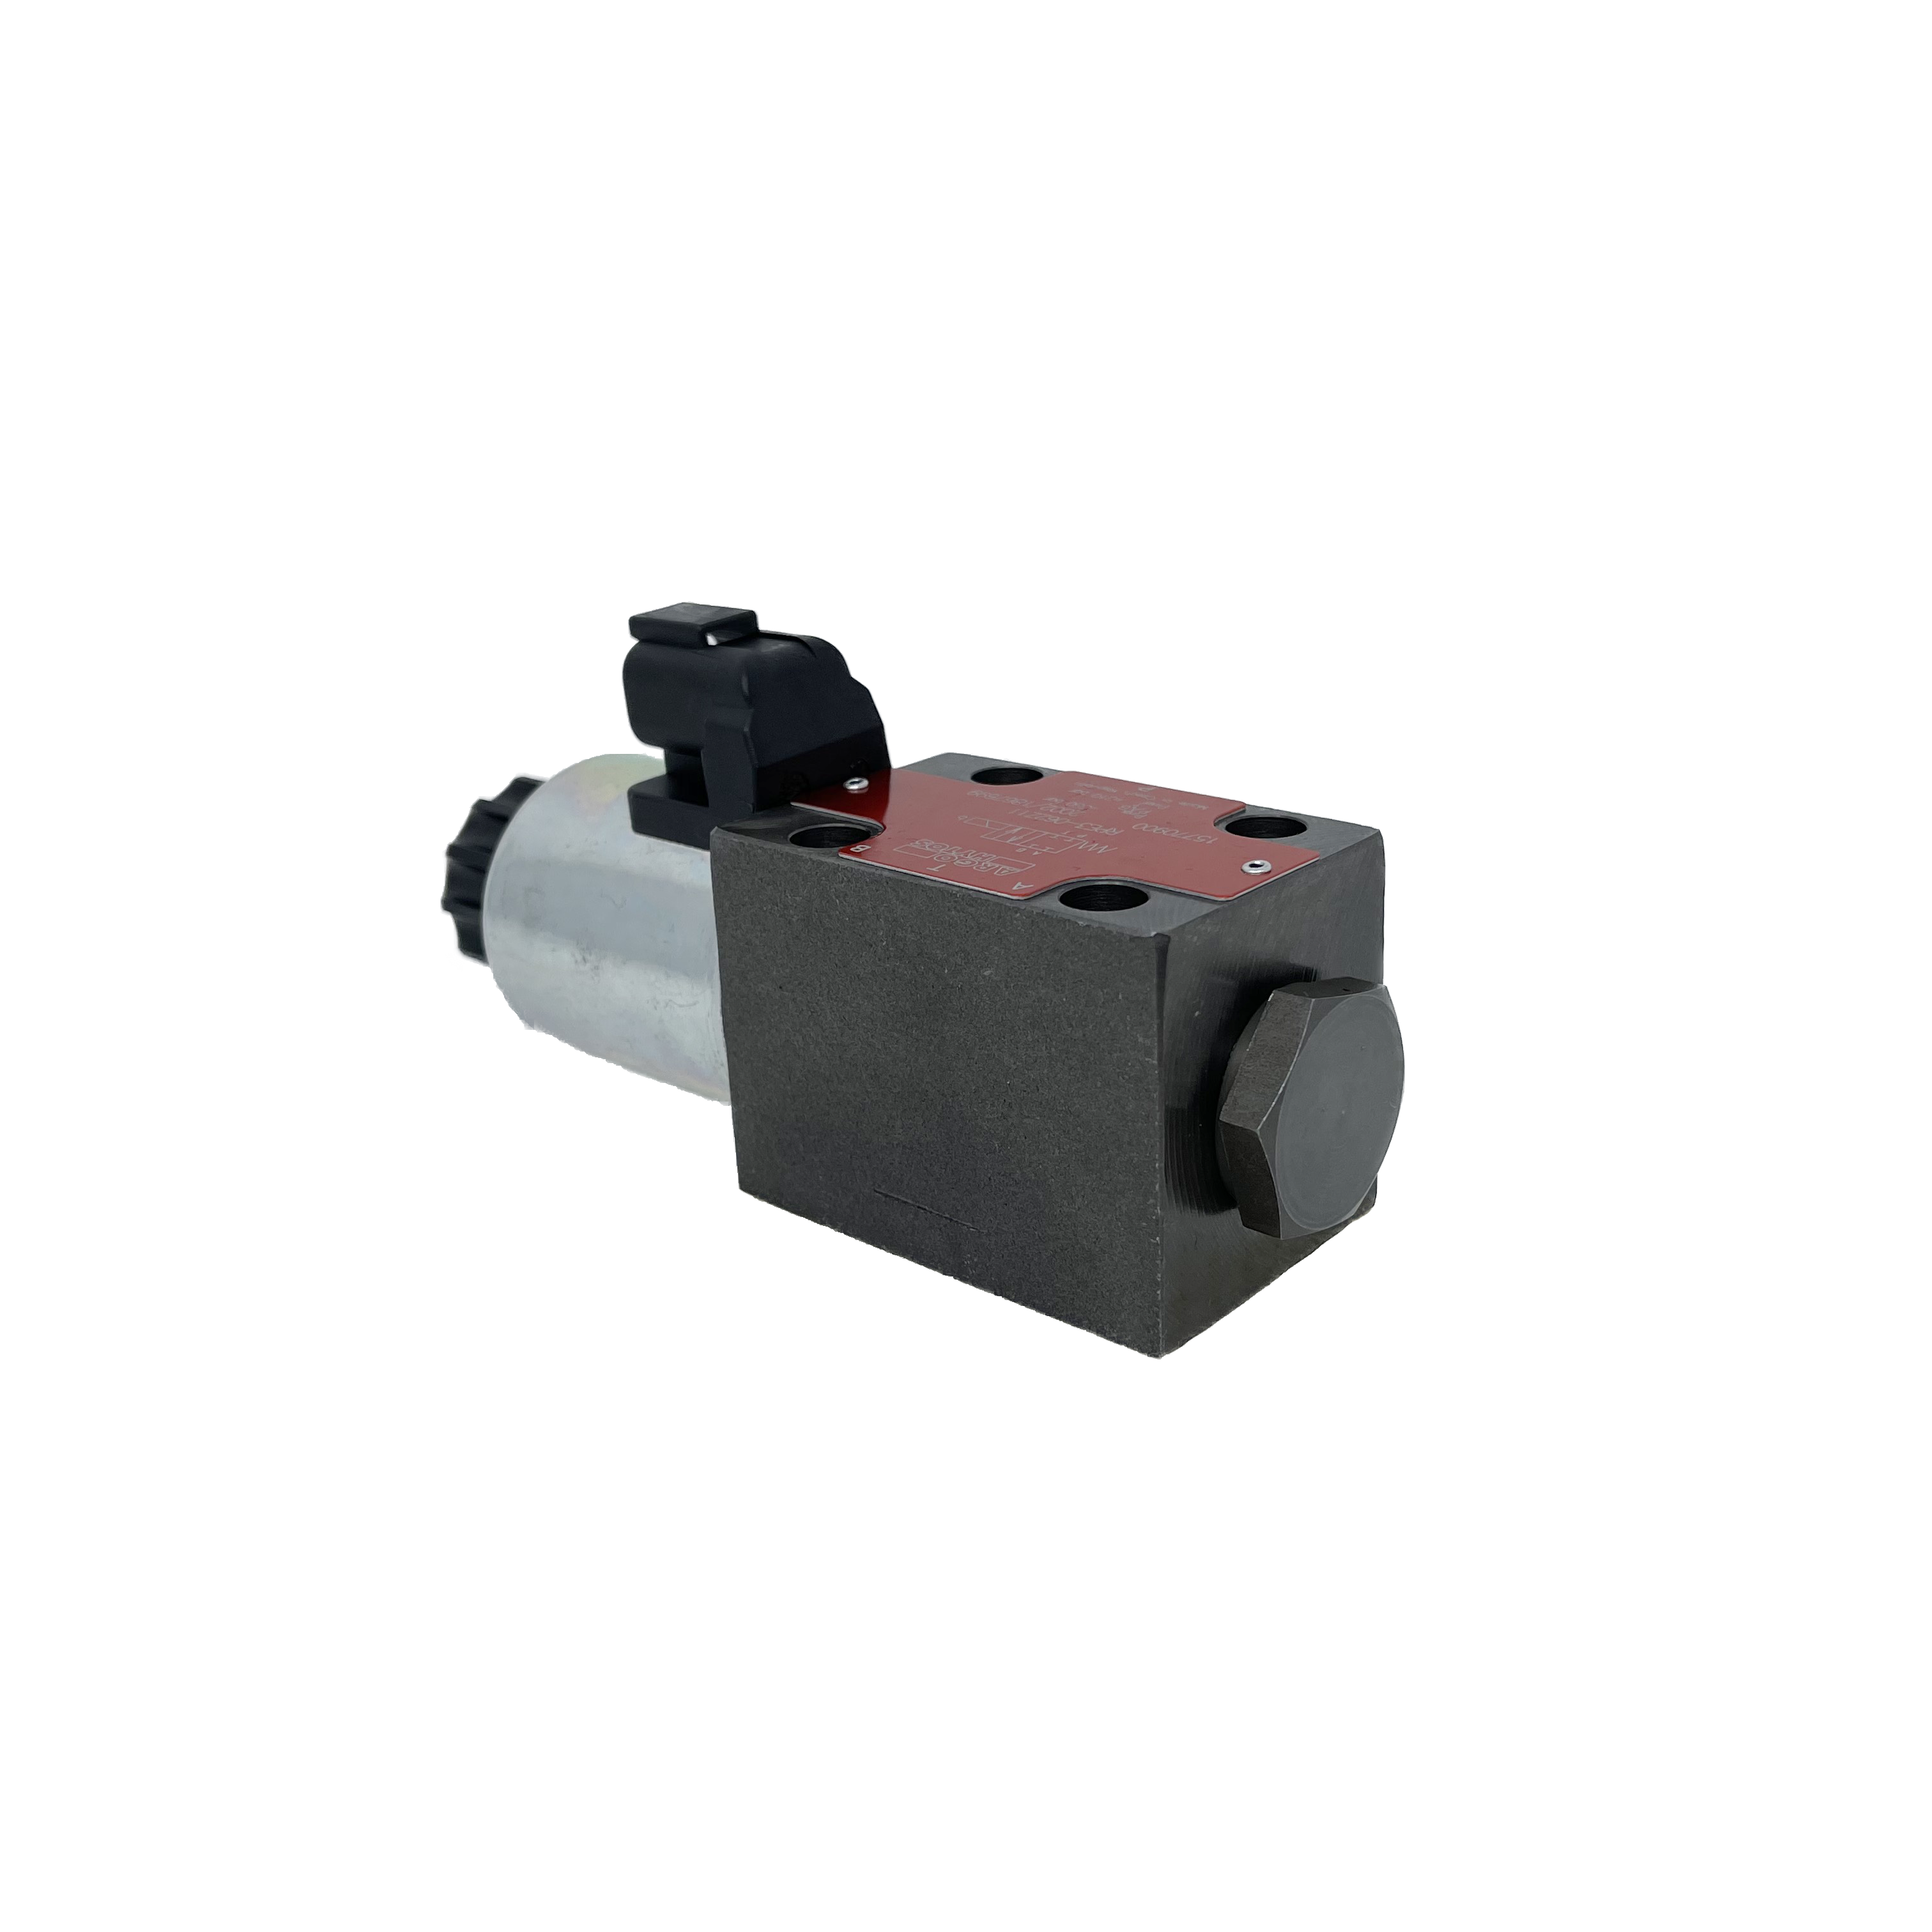 RPE3-062R11/01200E12A : Argo Hytos Directional Control Valve, D03 (NG6), 21GPM, 5100psi, 2P4W, 12 VDC, Deutsch, Spring Return, P to A & B to T Neutral, Coil Side A